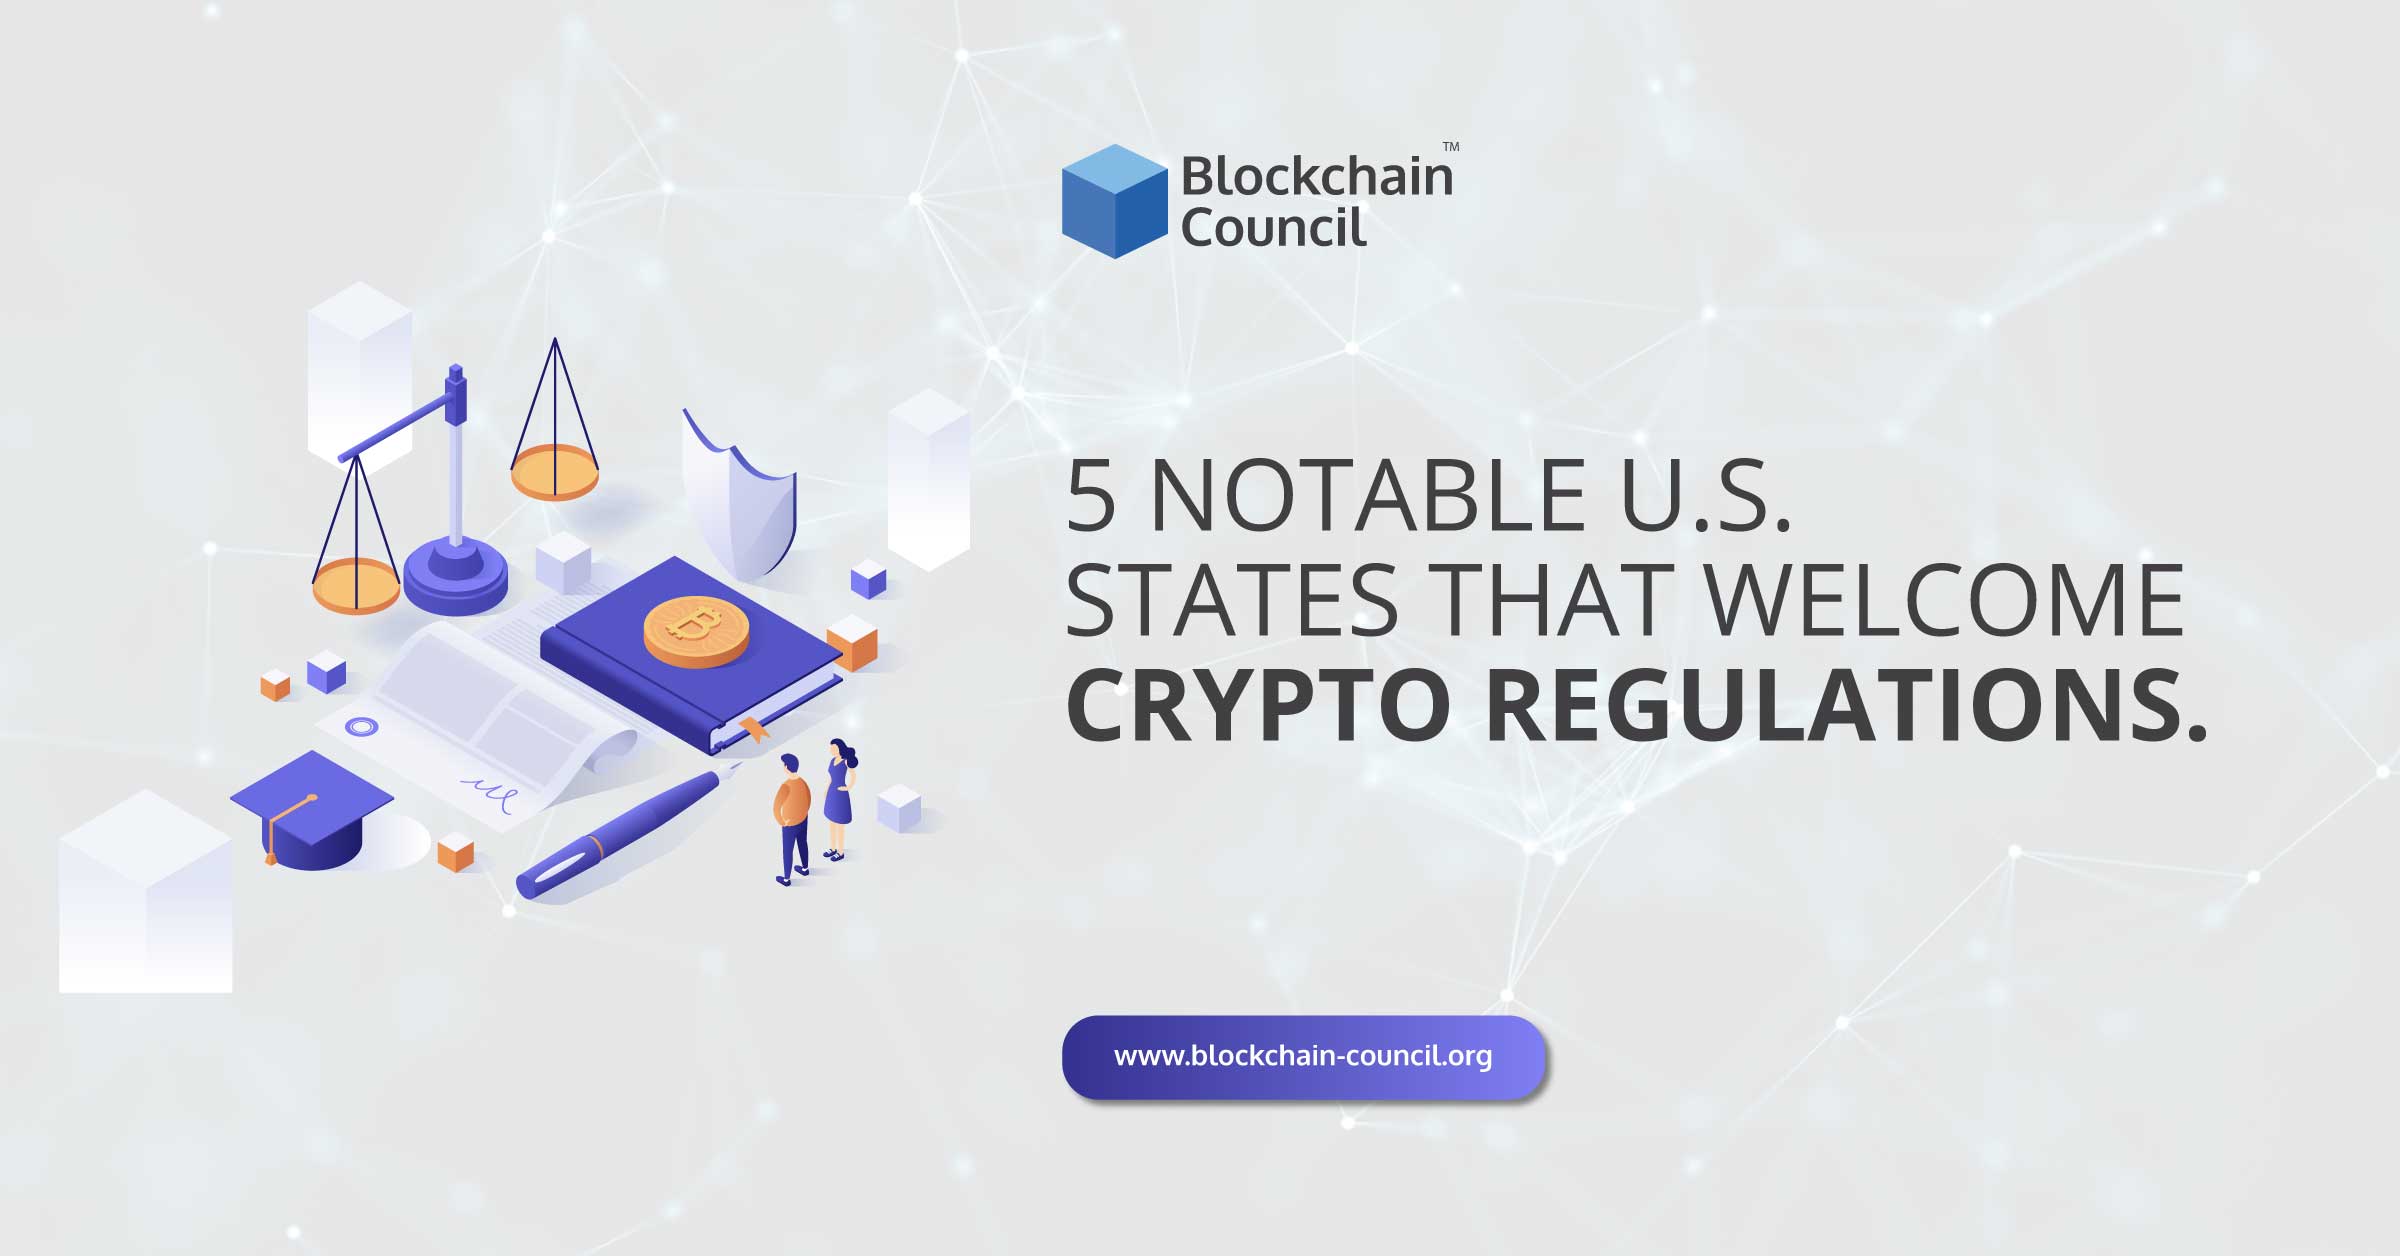 5 Notable U.S. States That Welcome Crypto Regulations